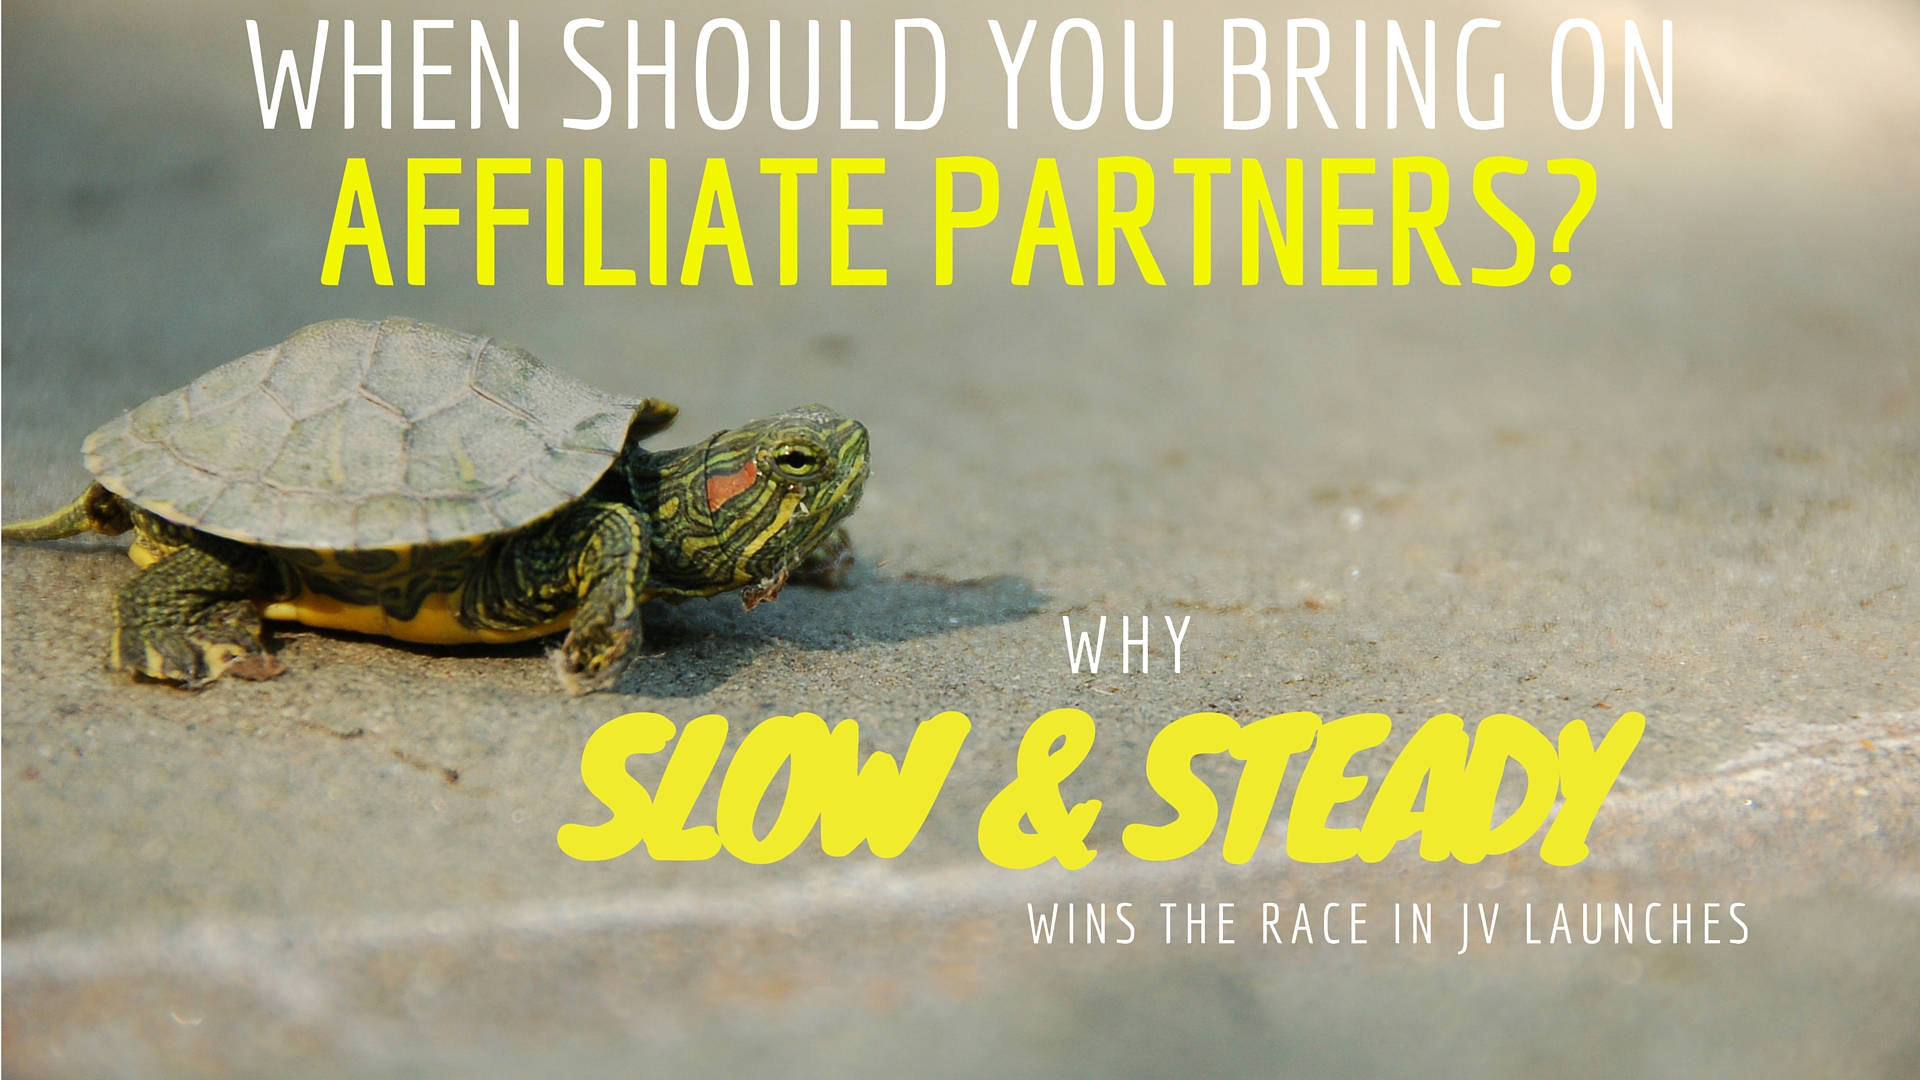 When should you bring on affiliate partners